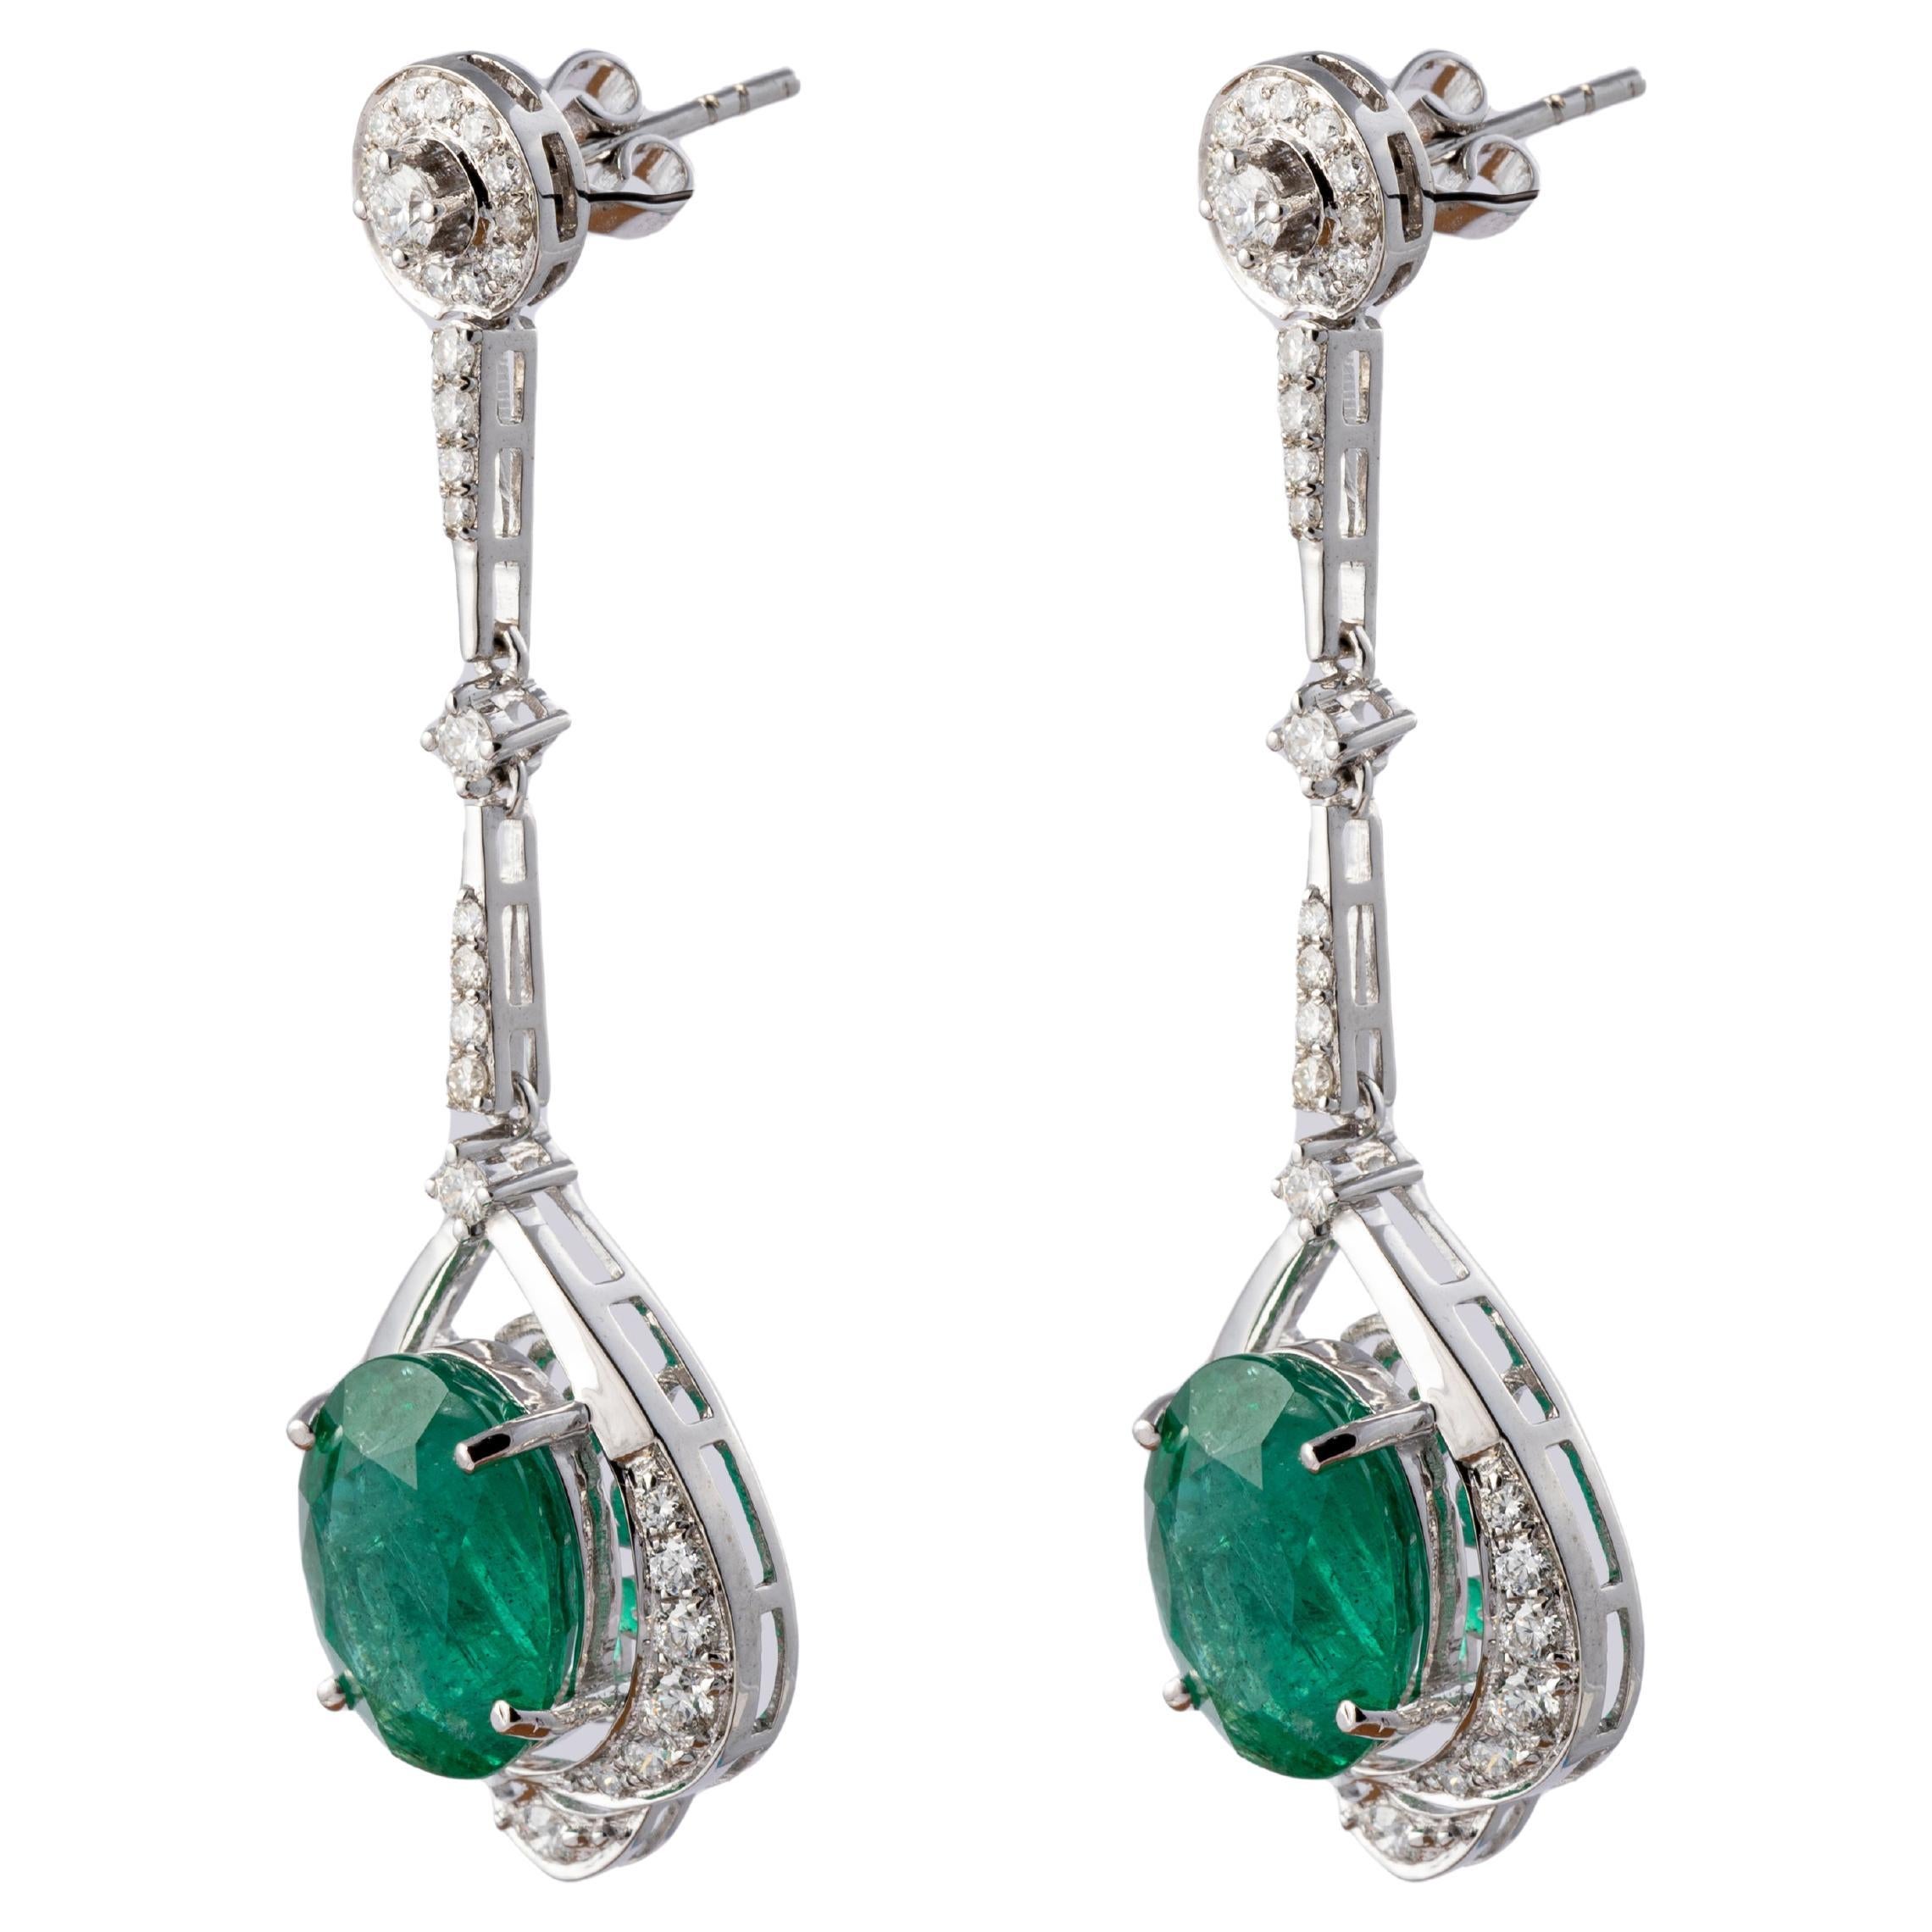 Natural Zambian Emerald Earrings with Diamonds and 14k Gold